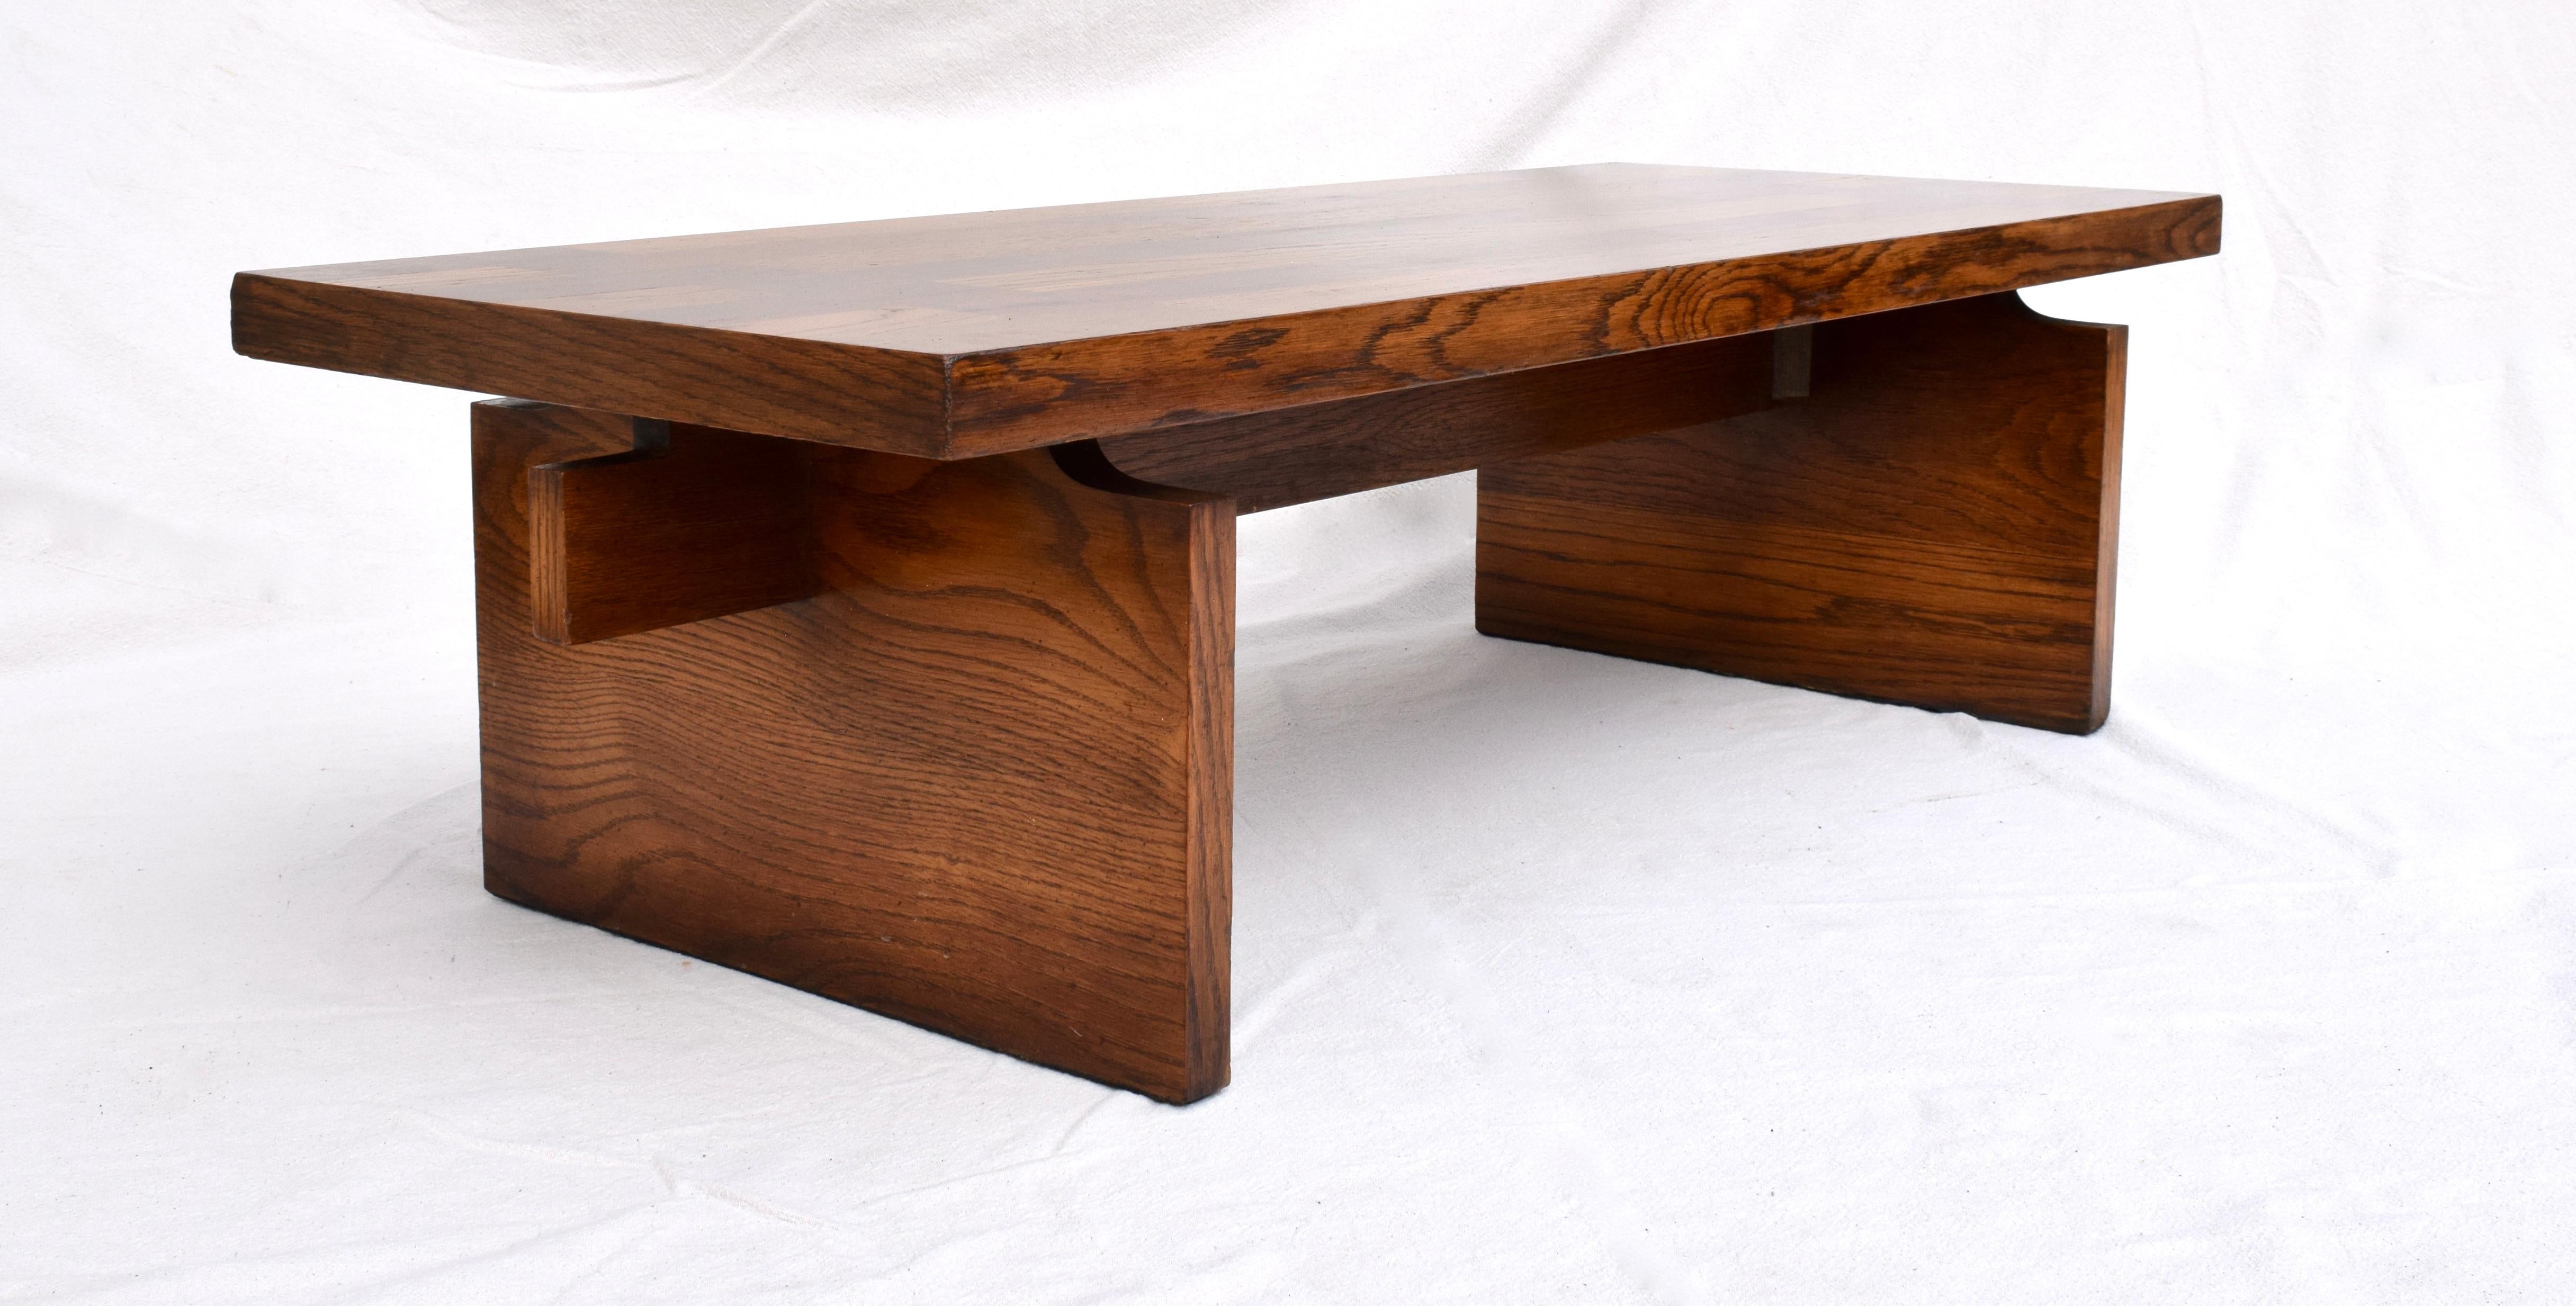 American Arts & Crafts Inspired Coffee Cocktail Table by Lane